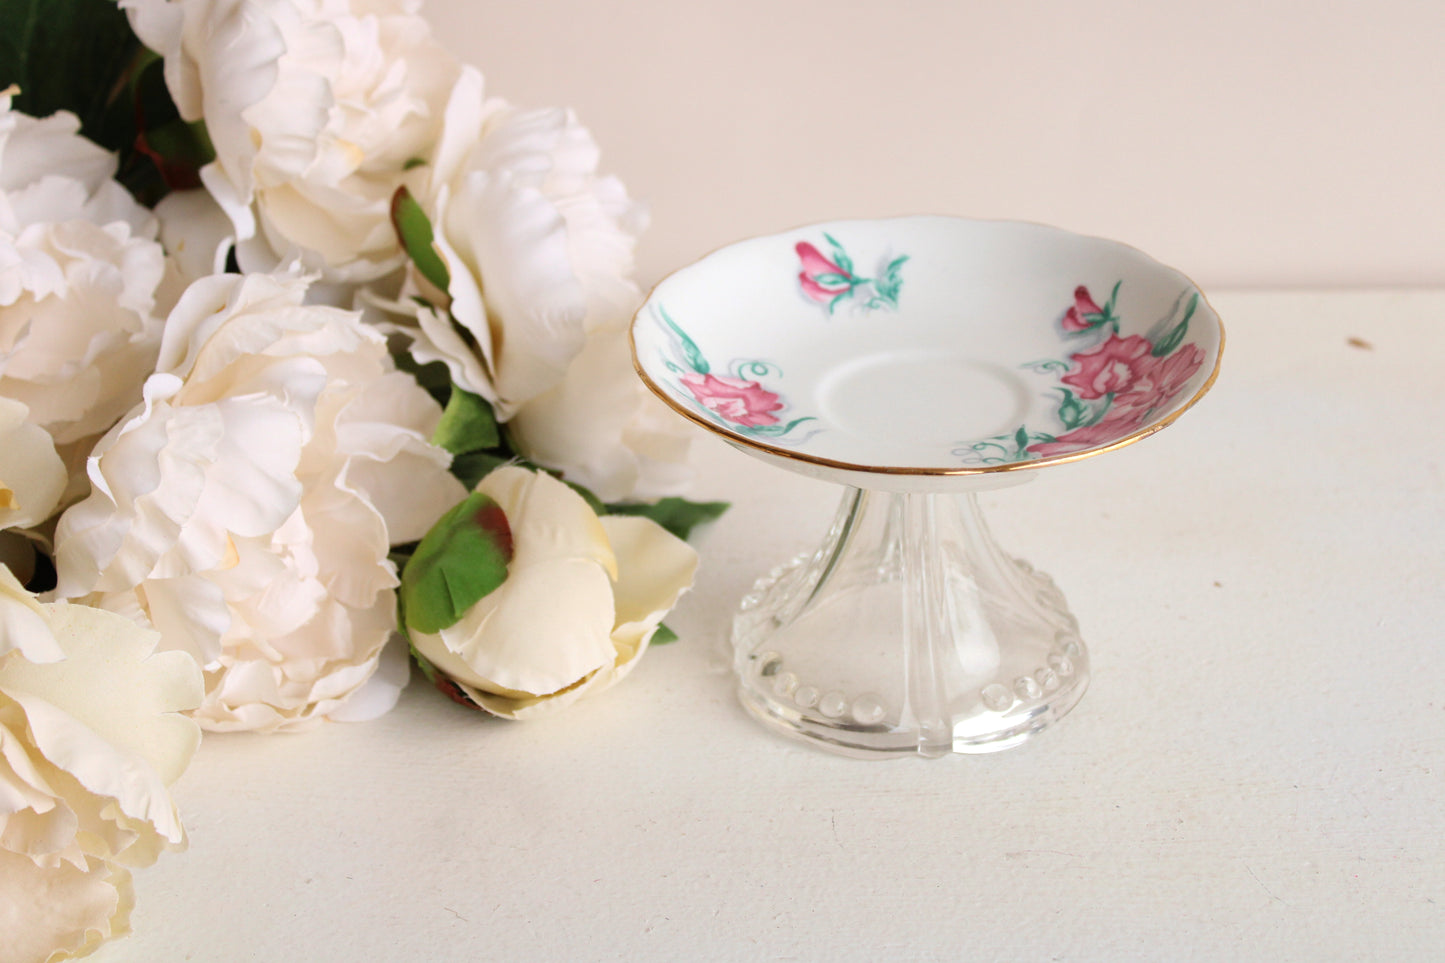 Vintage Upcycled Cupcake Plate, Soap Dish, Etc.